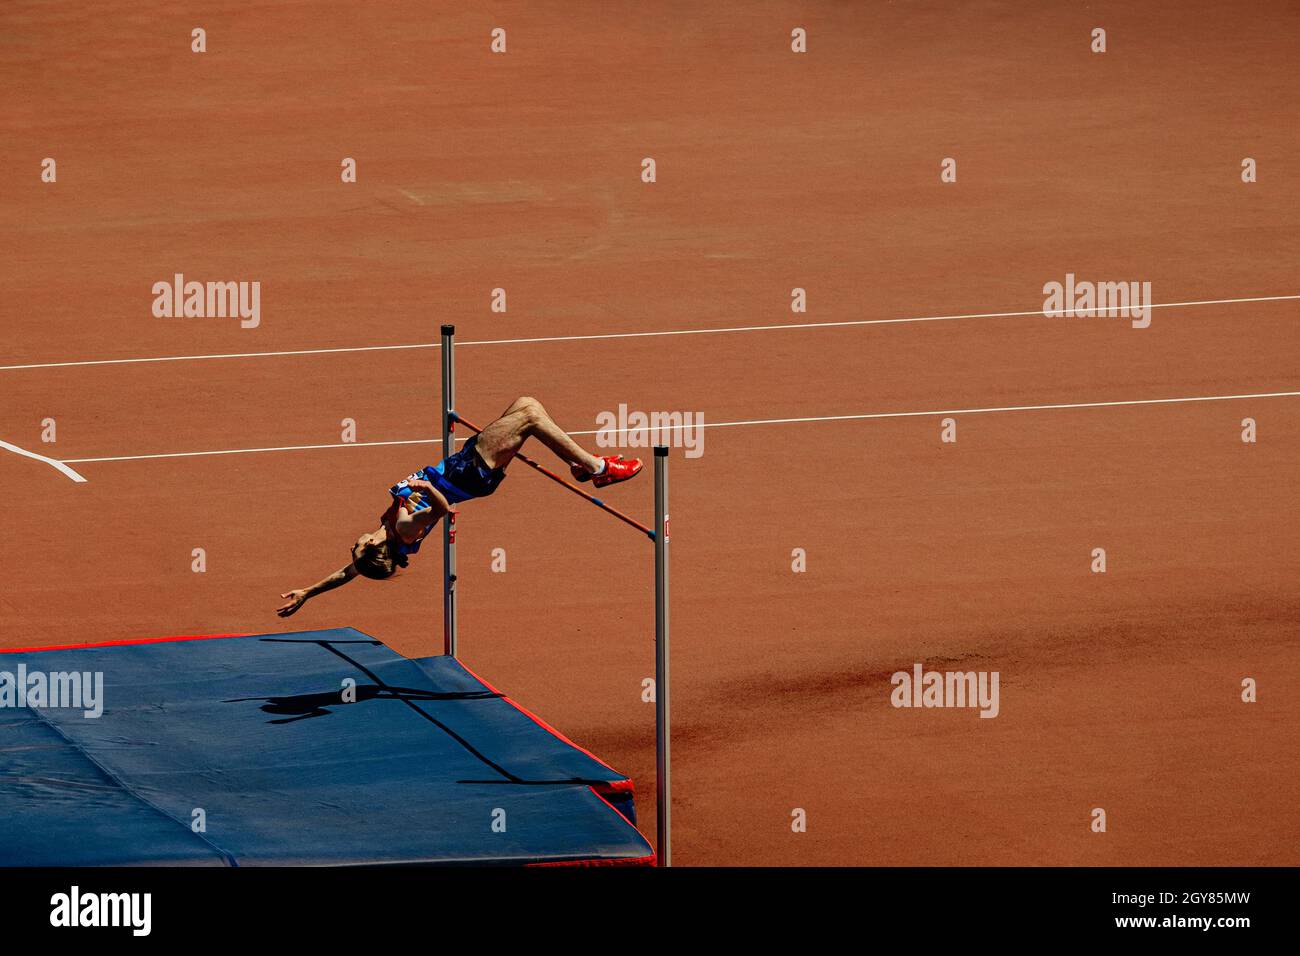 high jump male athlete jump at athletics competition Stock Photo